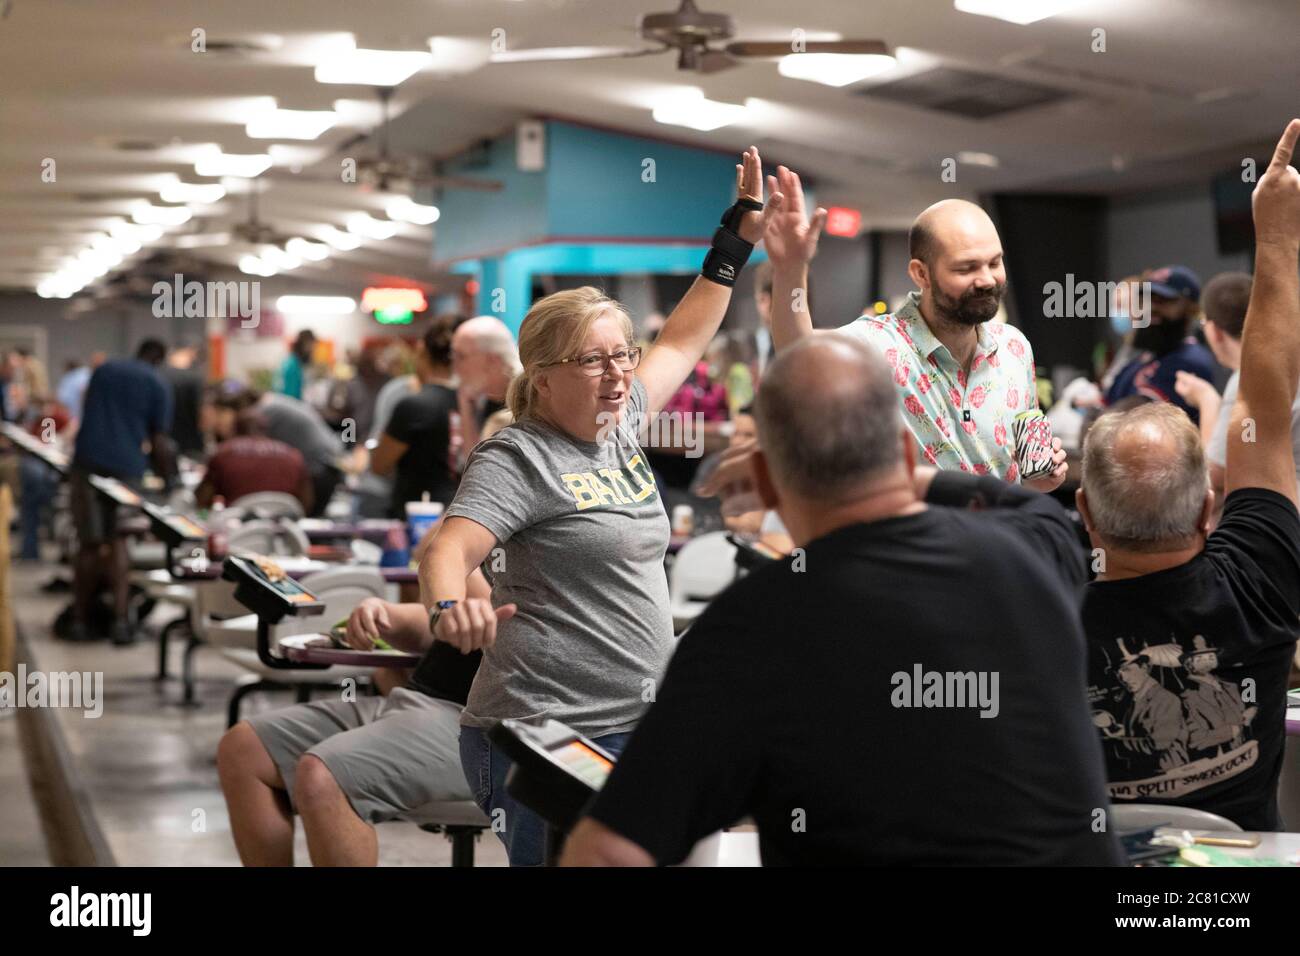 Austin, TX USA July 17, 2020: Patron Karen Klein and friends enjoy the last bowling night at Dart Bowl as the locally owned business, open for 64 years, closes due to economic struggles and the COVID-19 pandemic. Credit: Bob Daemmrich/Alamy Live News Stock Photo